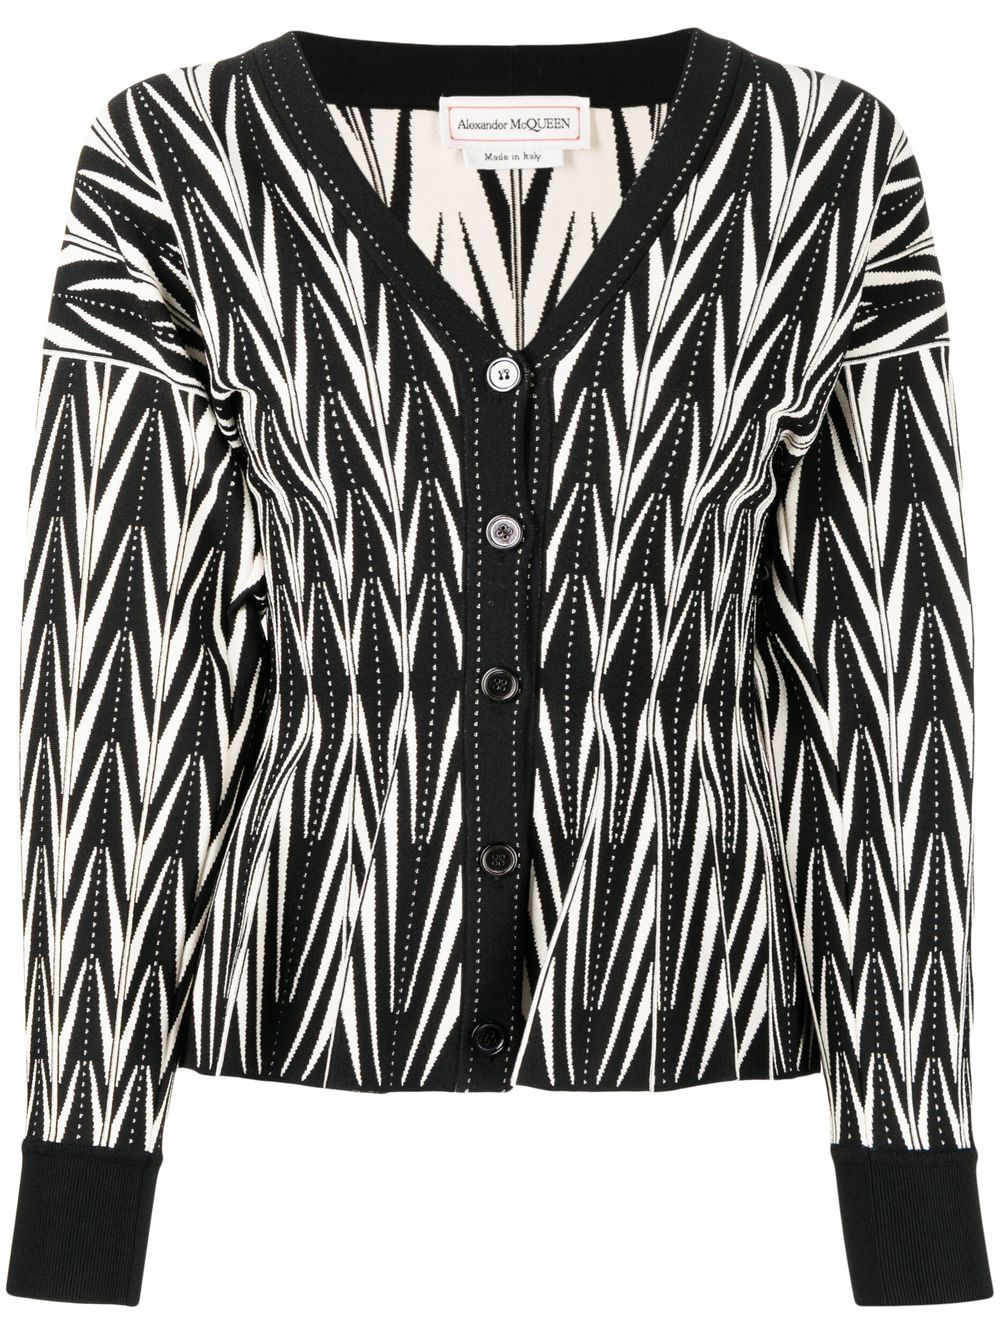 Image 1 of Alexander McQueen two-tone knit cardigan